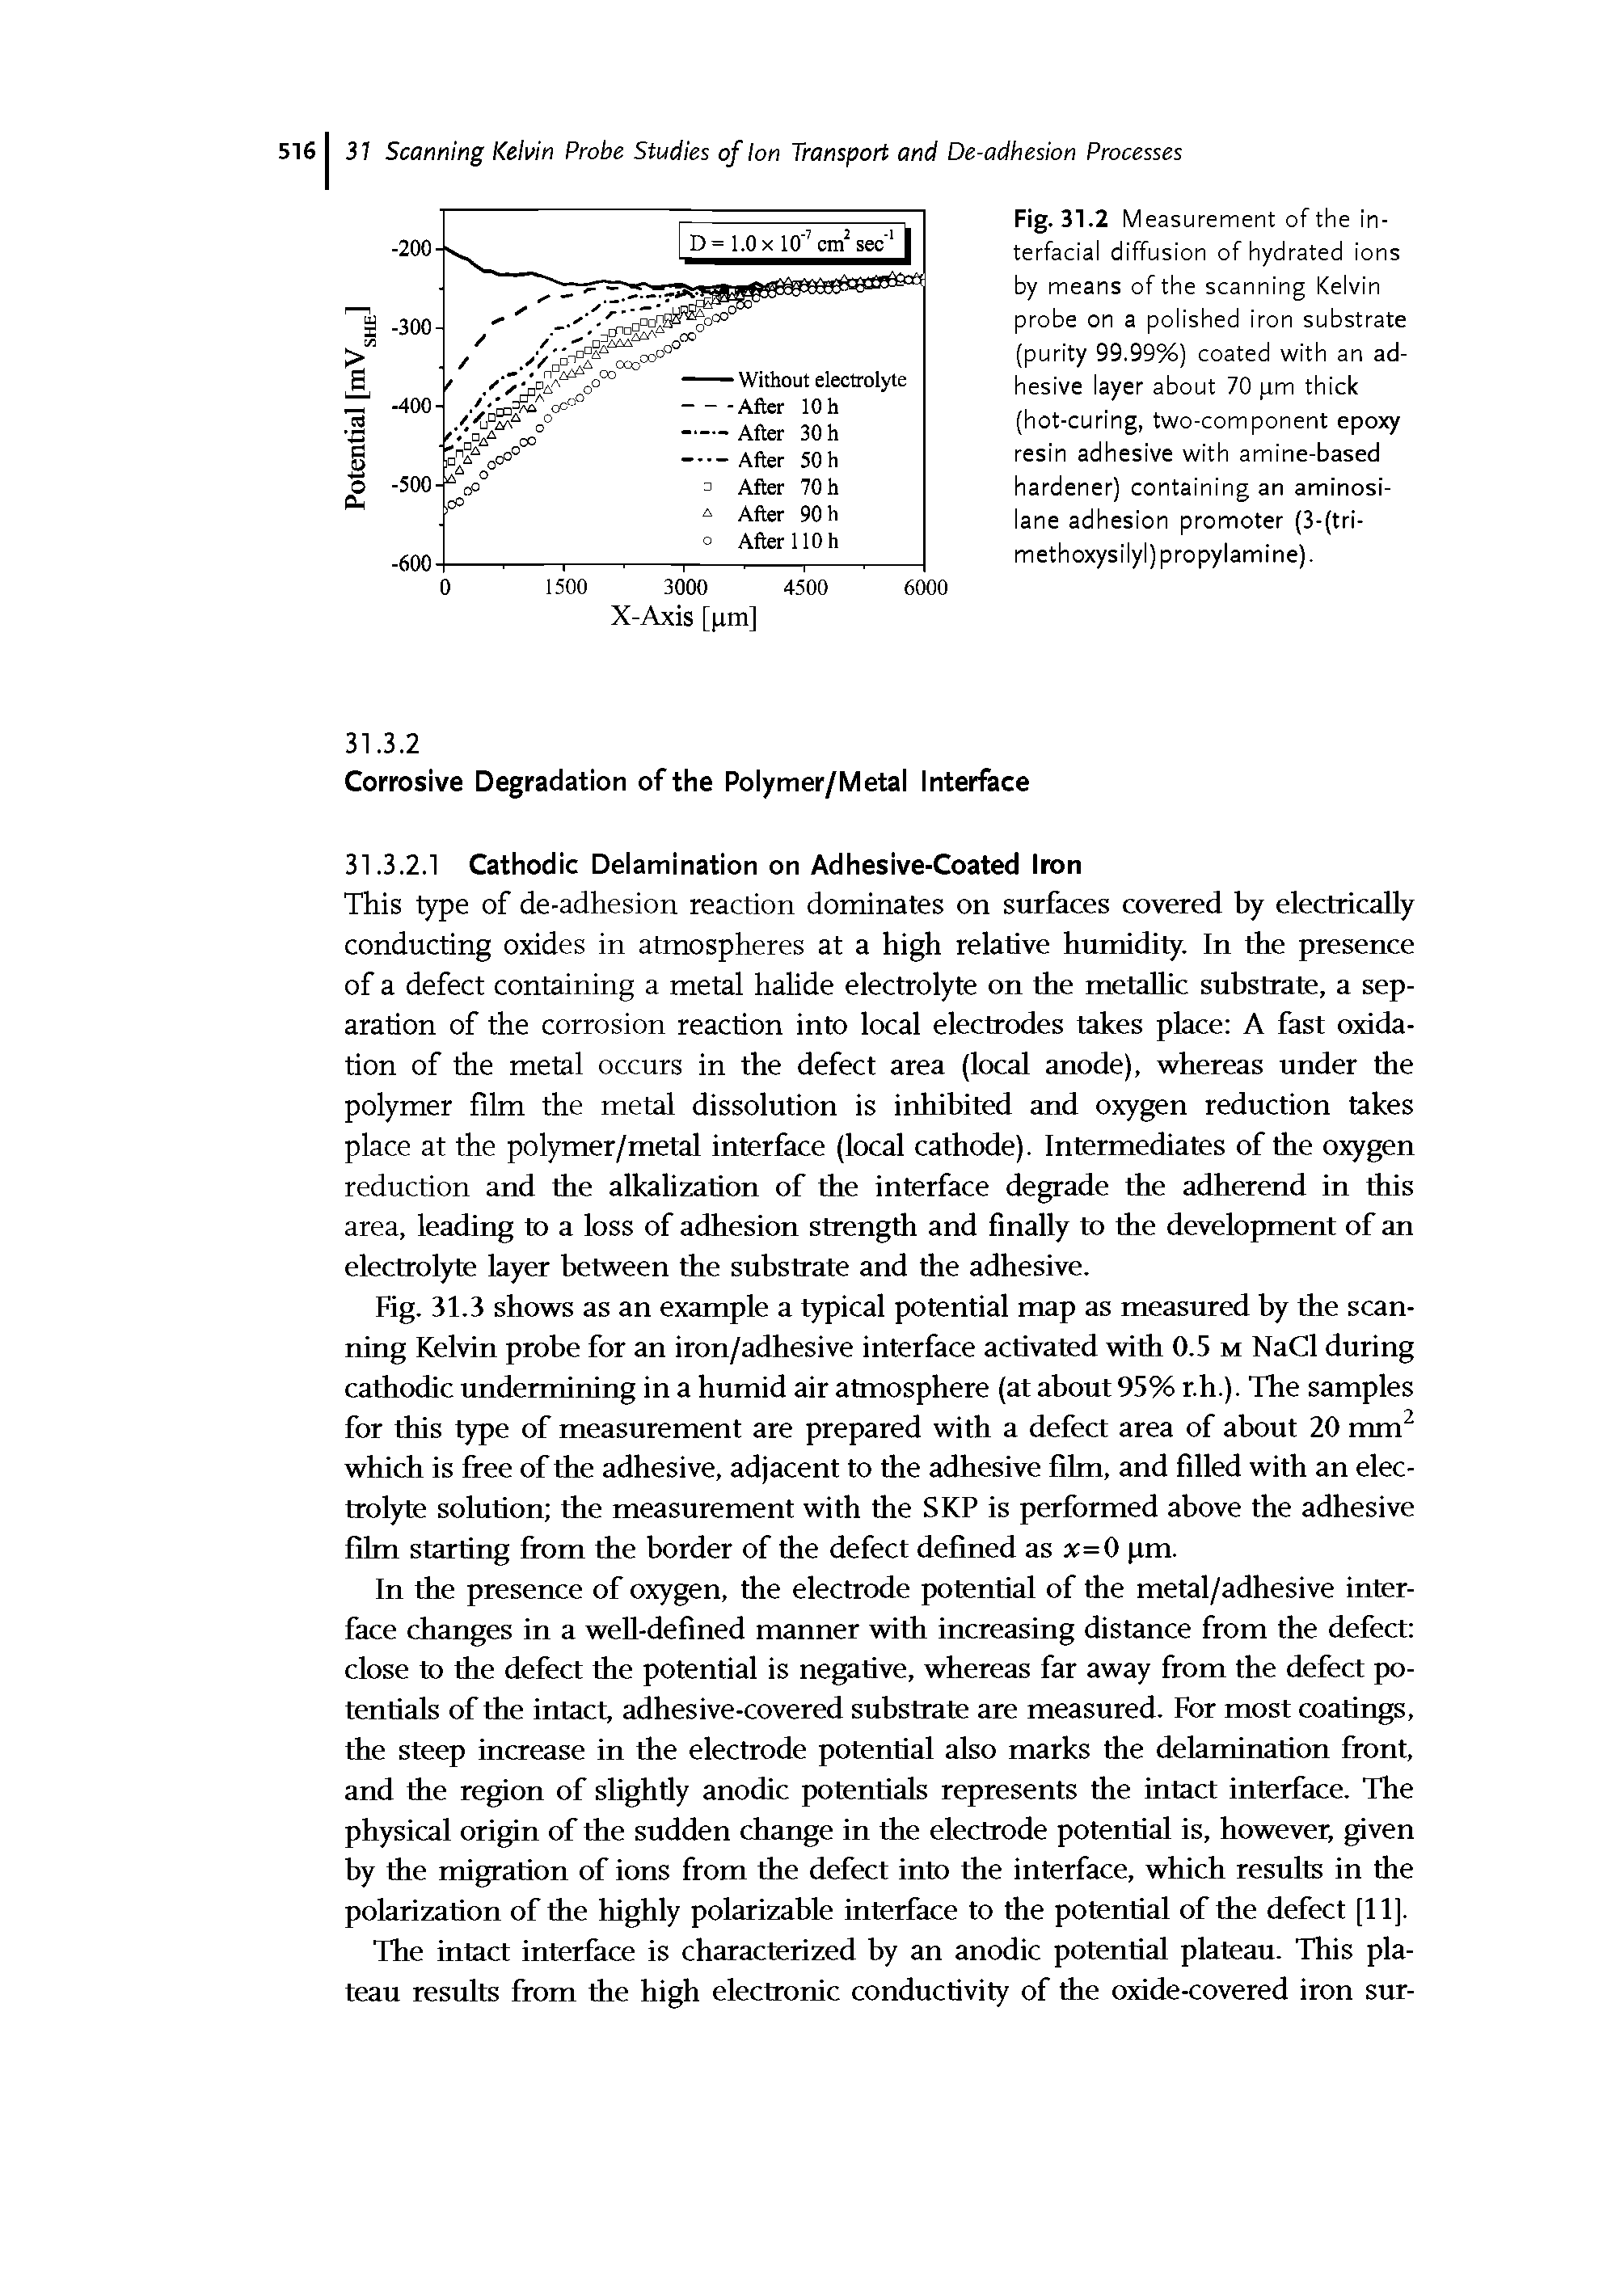 Fig. 31.2 Measurement of the interfacial diffusion of hydrated ions by means of the scanning Kelvin probe on a polished iron substrate (purity 99.99%) coated with an adhesive layer about 70 pm thick (hot-curing, two-component epoxy resin adhesive with amine-based hardener) containing an aminosi-lane adhesion promoter (3-(tri-methoxysilyl) propylamine).